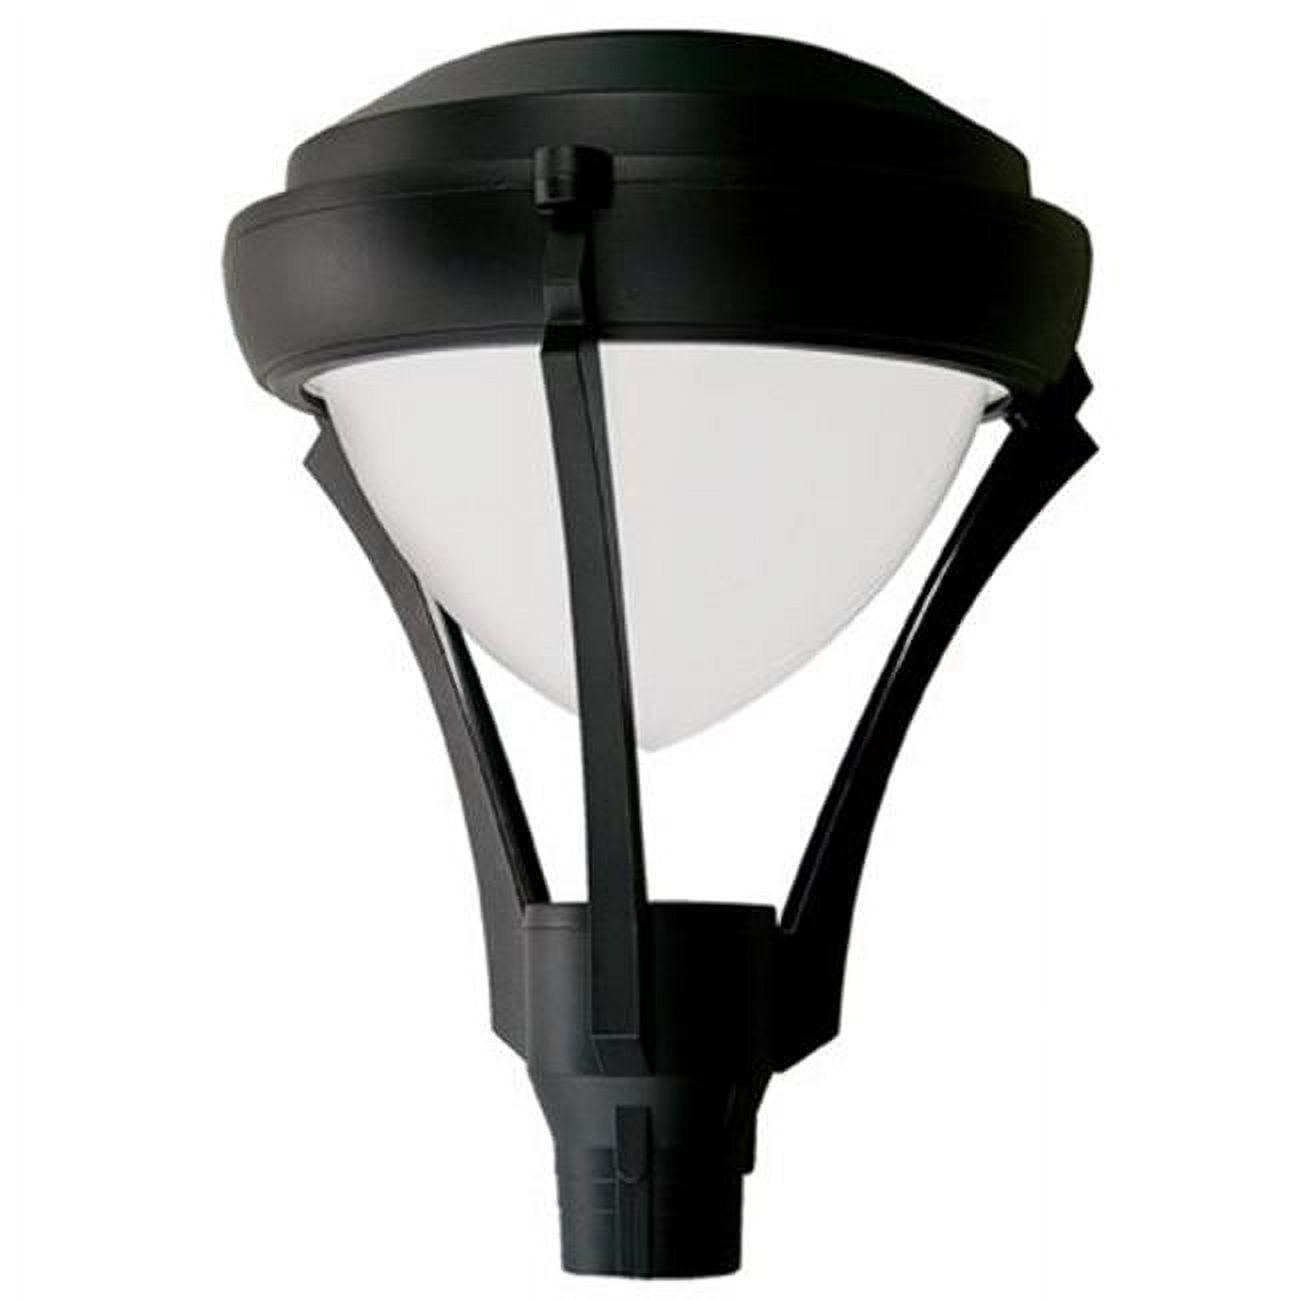 Picture of Dabmar Lighting GM597-B 70W 120V Powder Coated Cast Aluminum Post Top Light Fixture with Metal Halide Lamp, Black - 27.95 x 21.65 x 21.65 in.